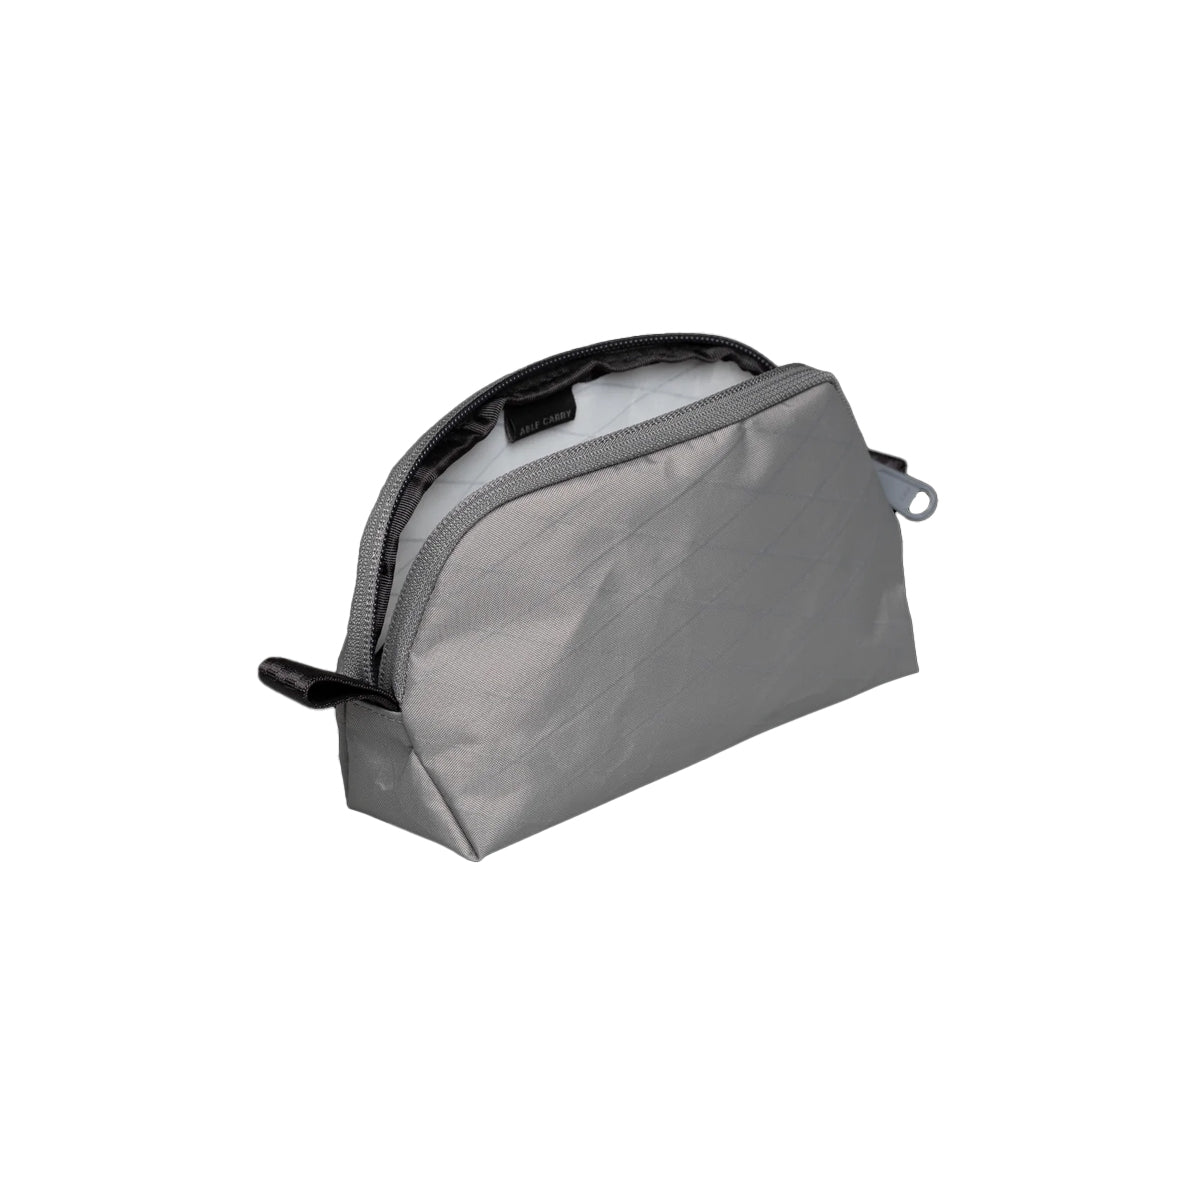 [PO] Able Carry : The Daily Stash Pouch : X-Pac Castlerock Grey (VX21)